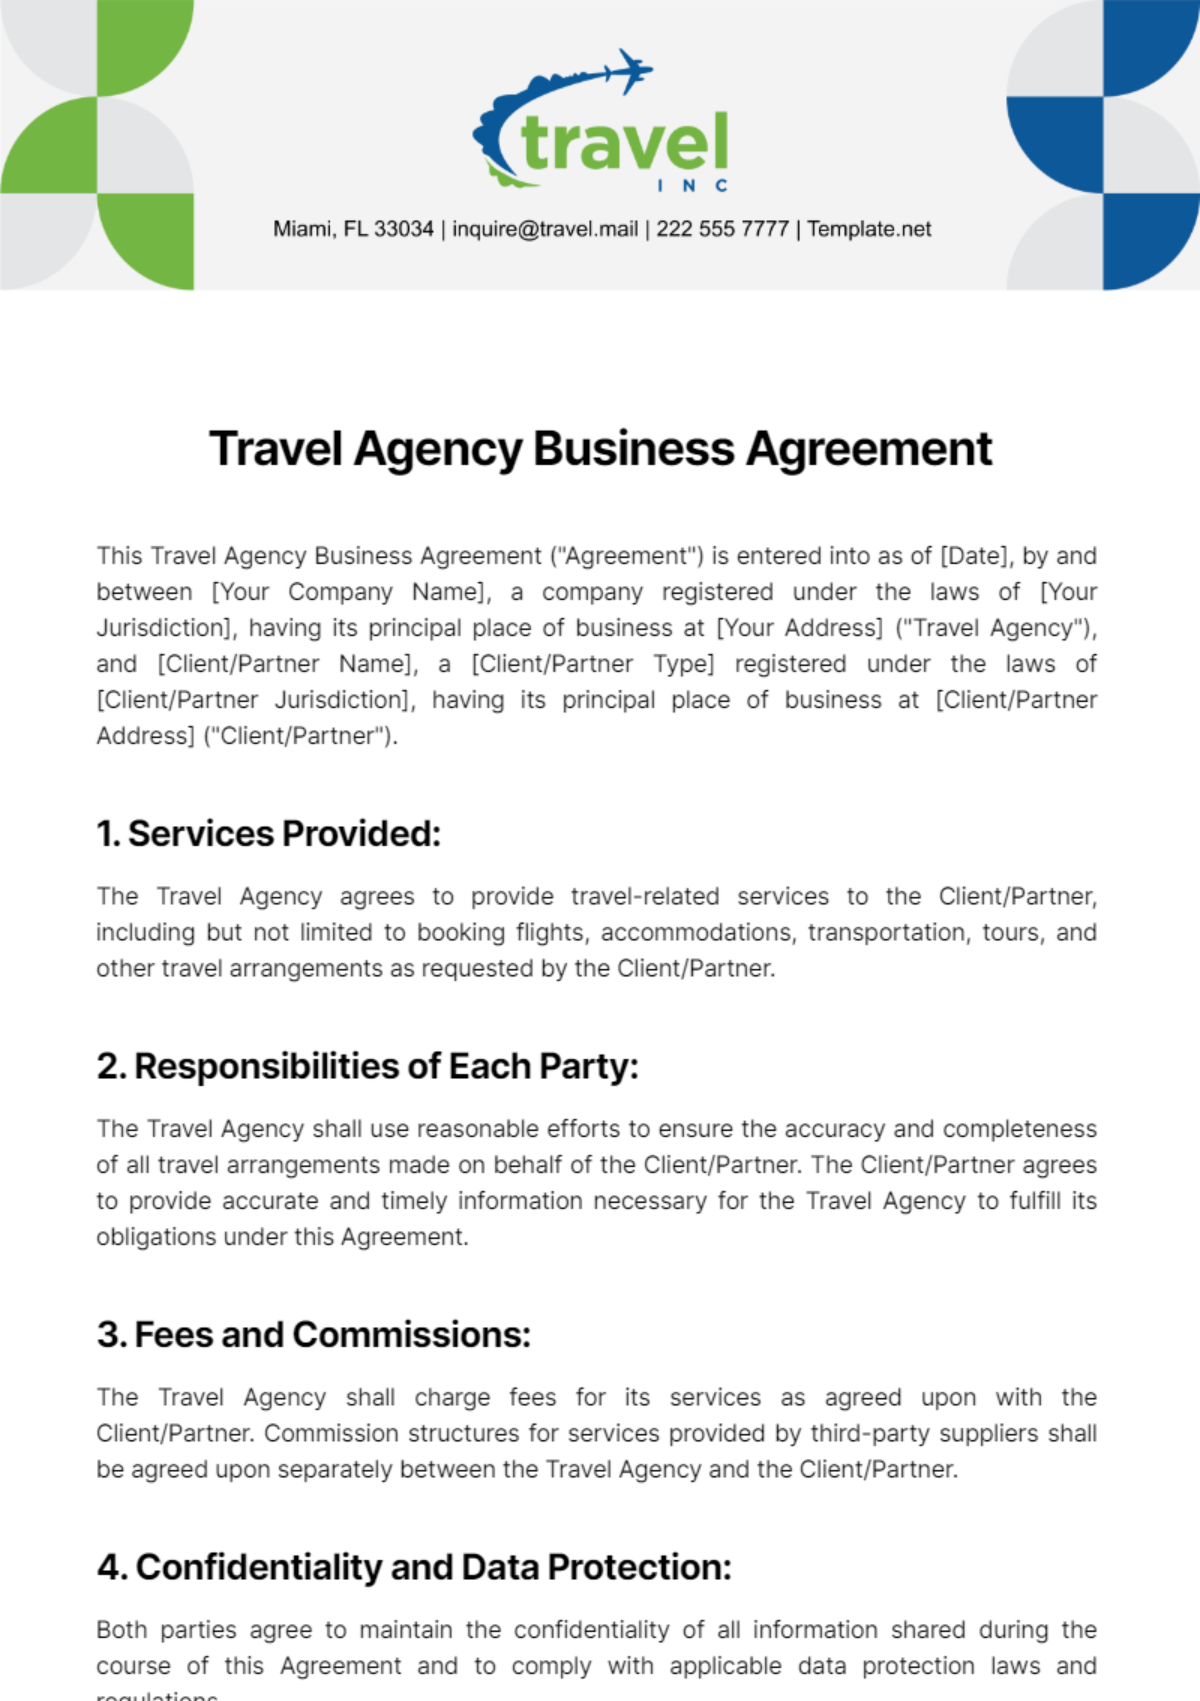 Free Travel Agency Business Agreement Template